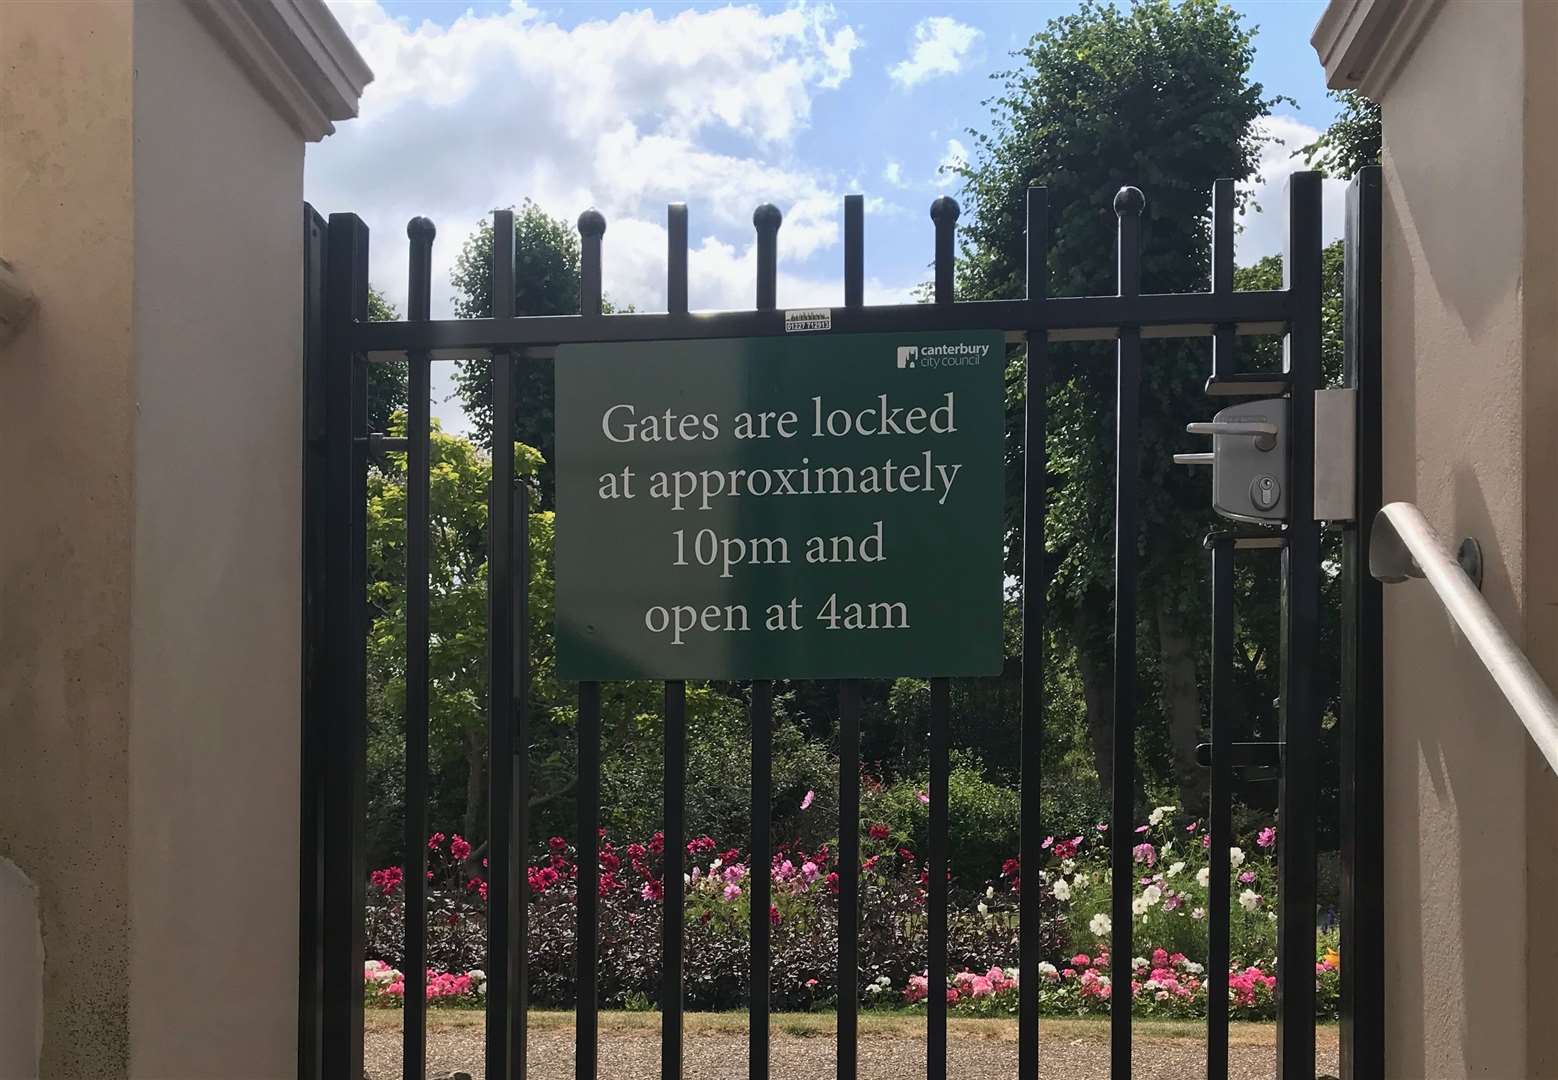 New gates have been installed at entrances to the Dane John Gardens